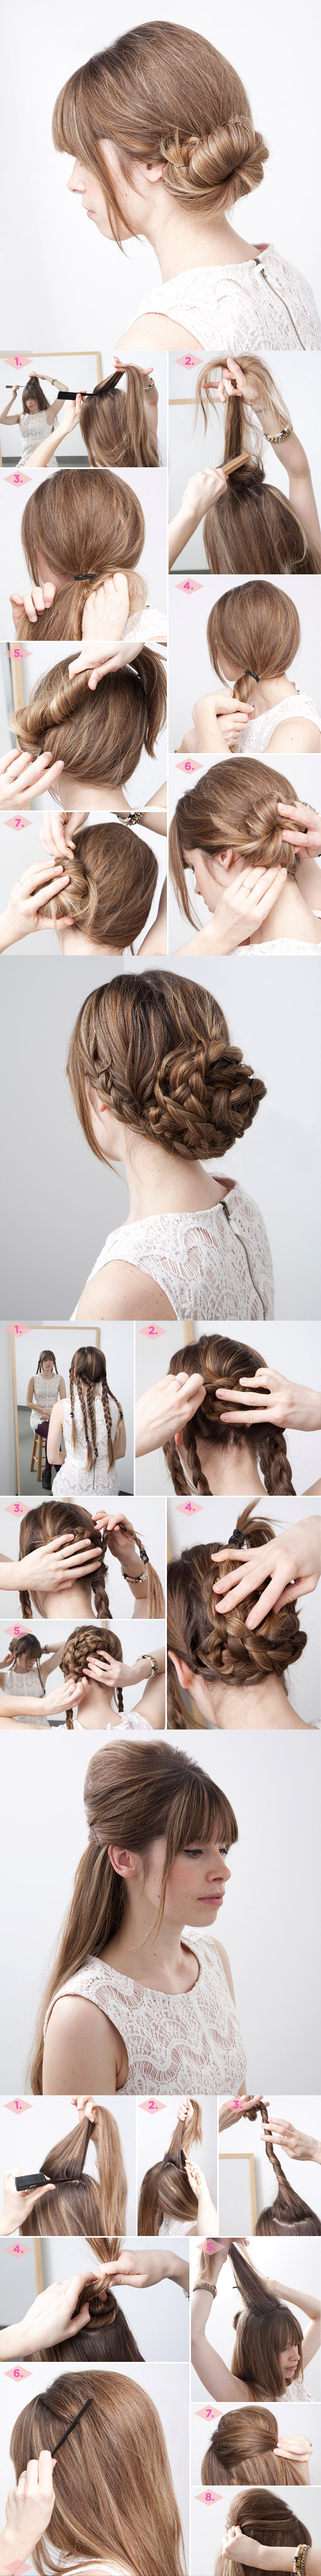 Oh-So-Simple Bun Hairstyles Tutorials: 3 Kinds of Bun Hairstyles Included